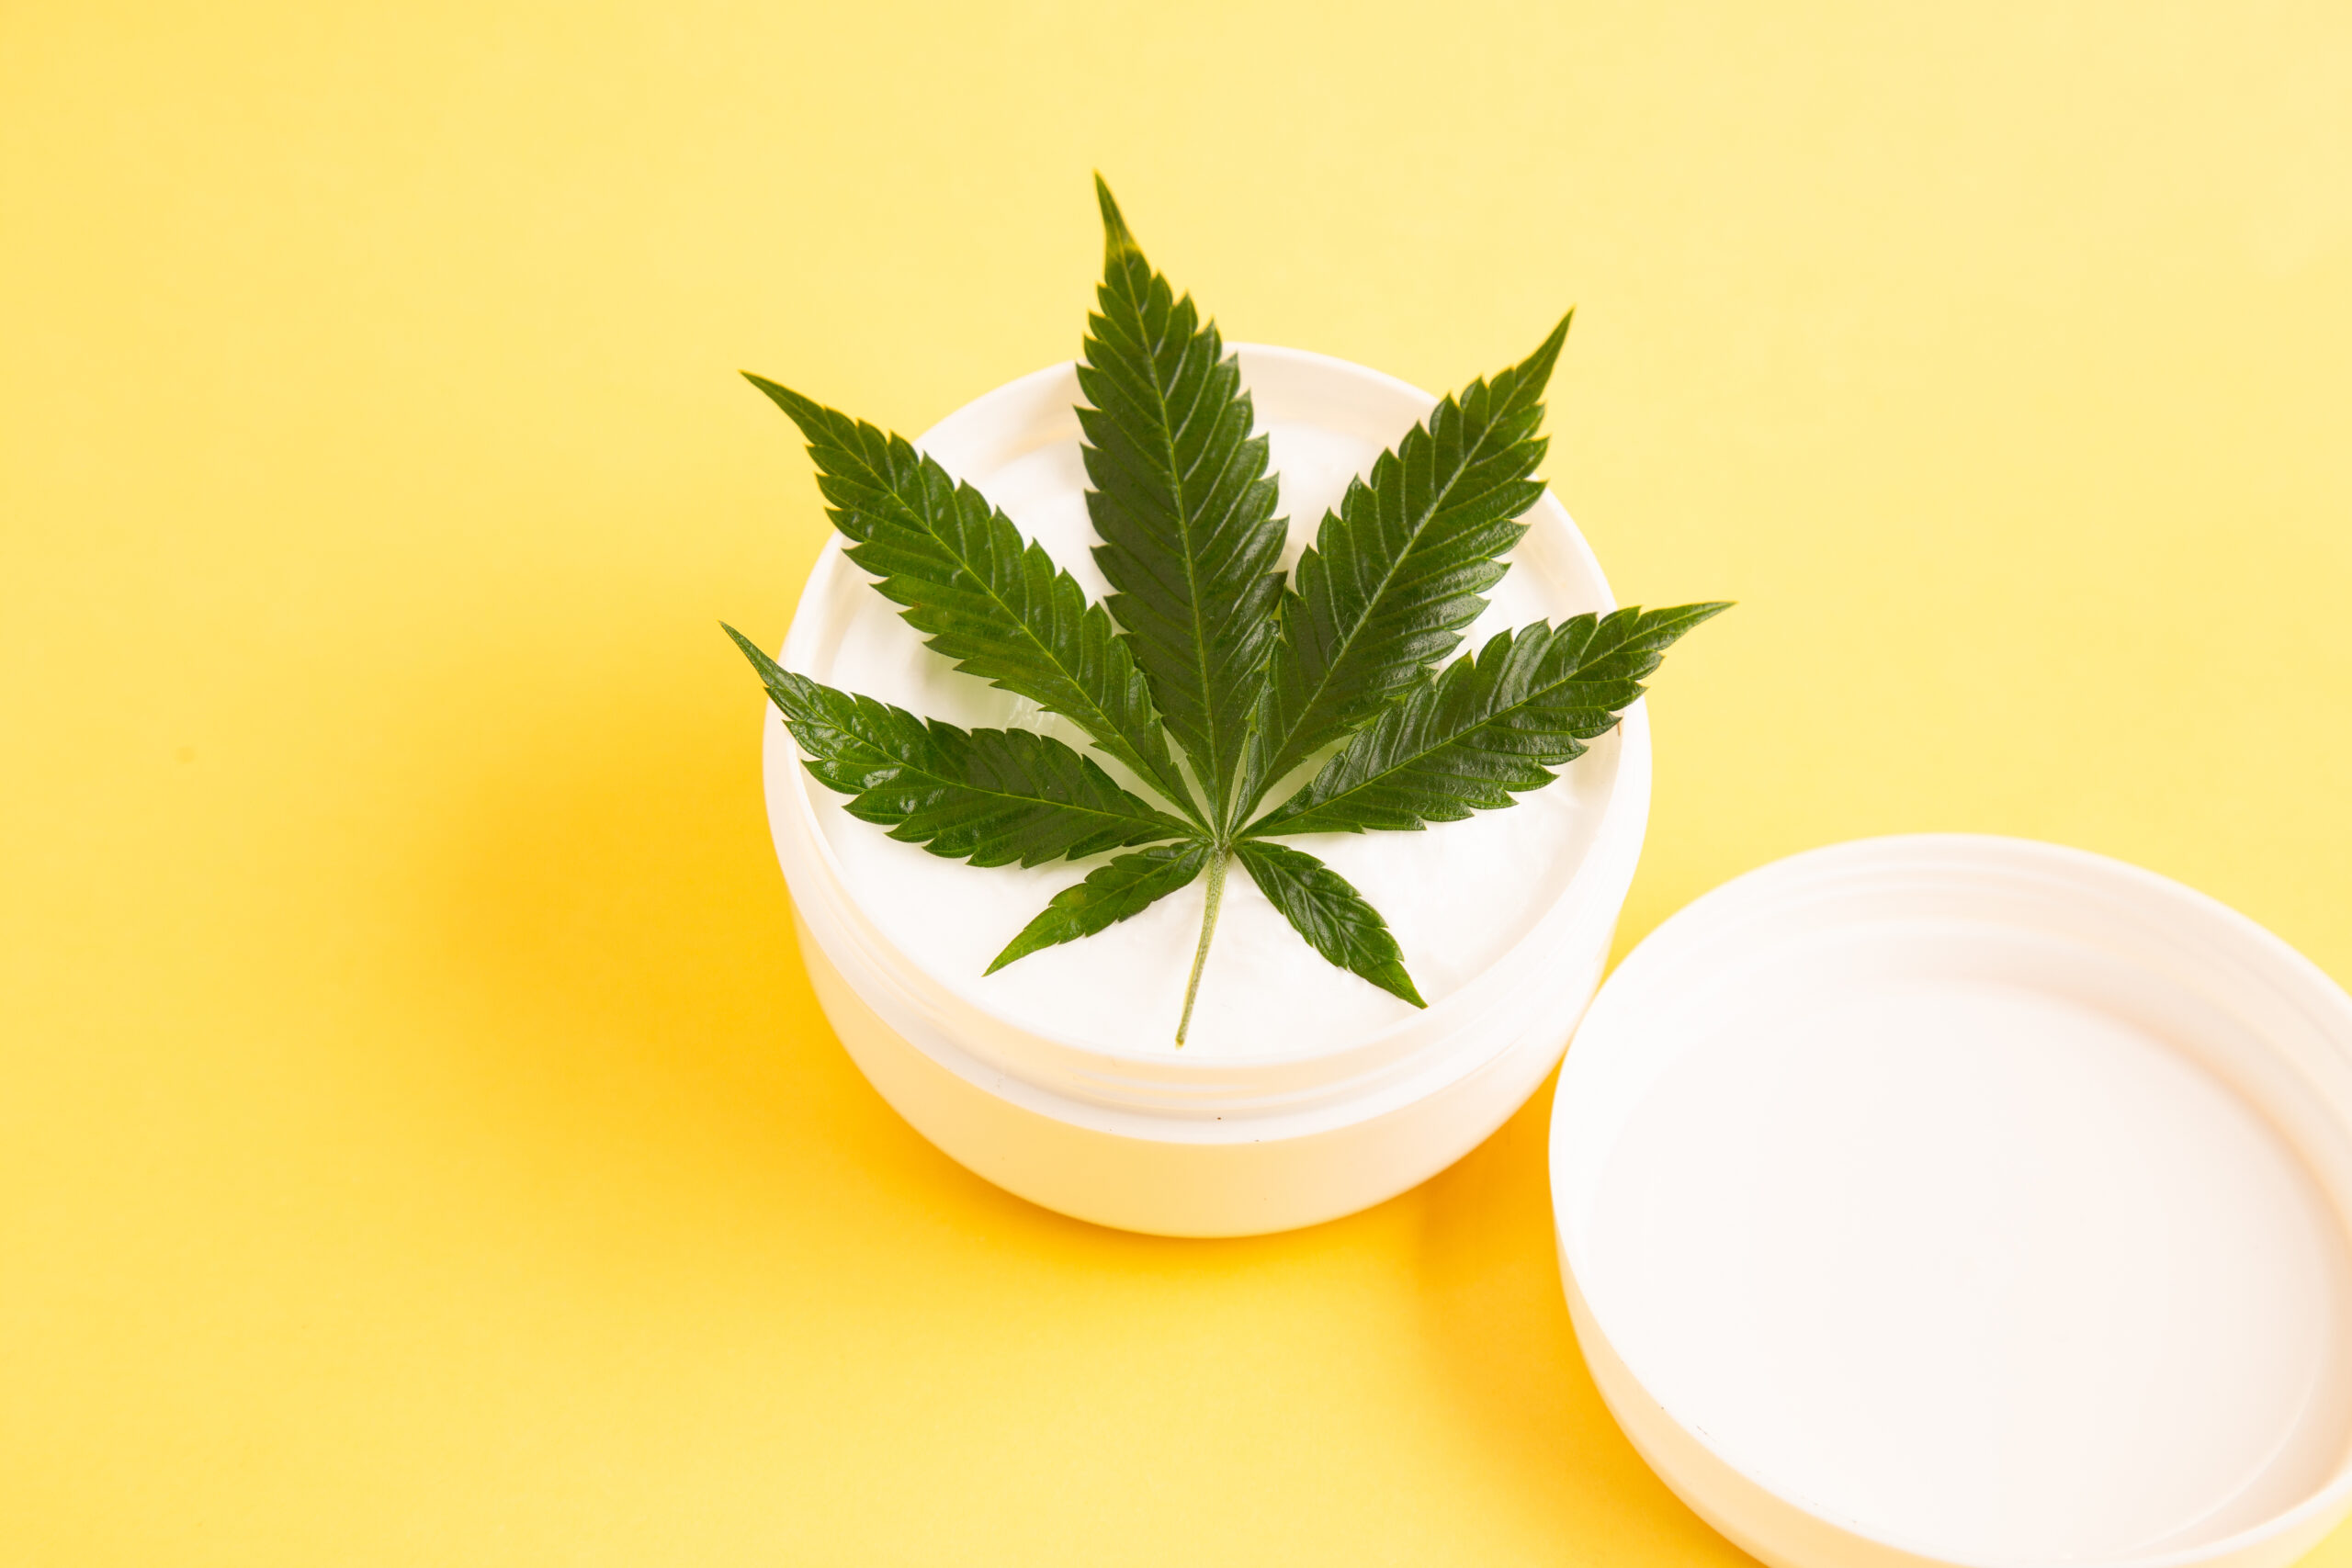 Cannabis Topicals and Skin Care: Everything You Want to Know About Using Cannabis Products on Your Skin